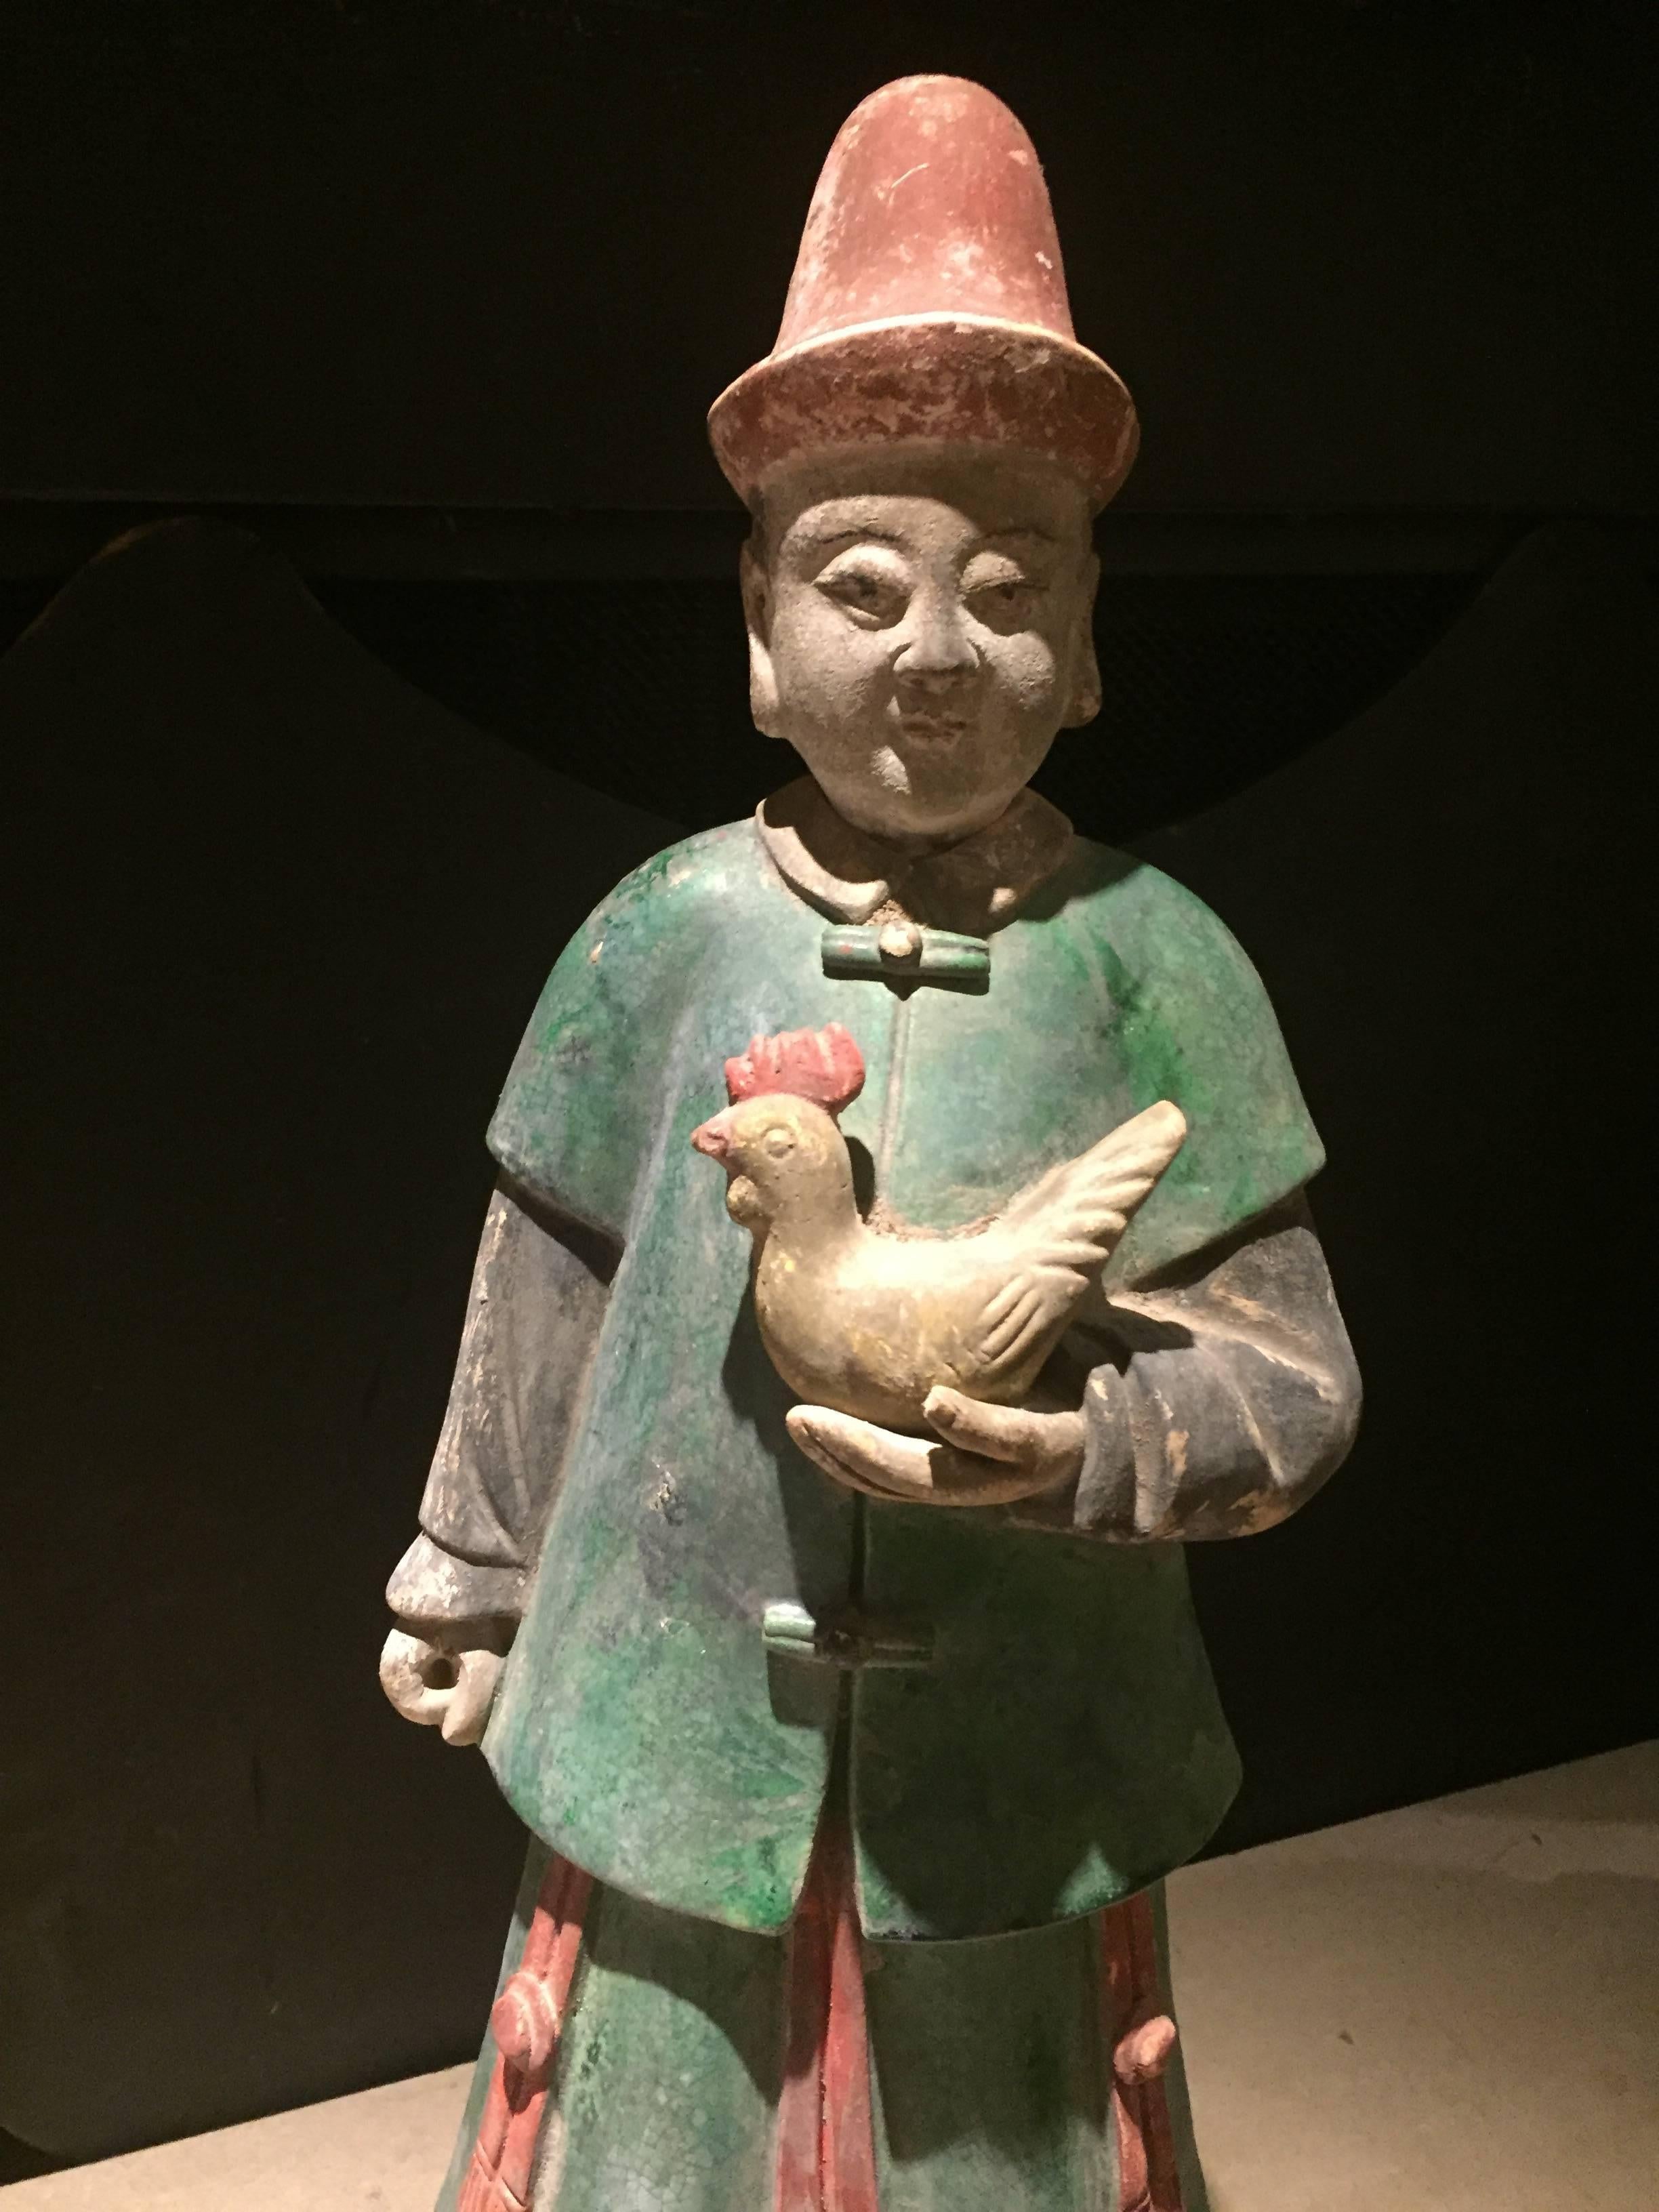 Glazed Important Monumental Ancient China Ming Tomb Treasure Sculpture, 1368-1644